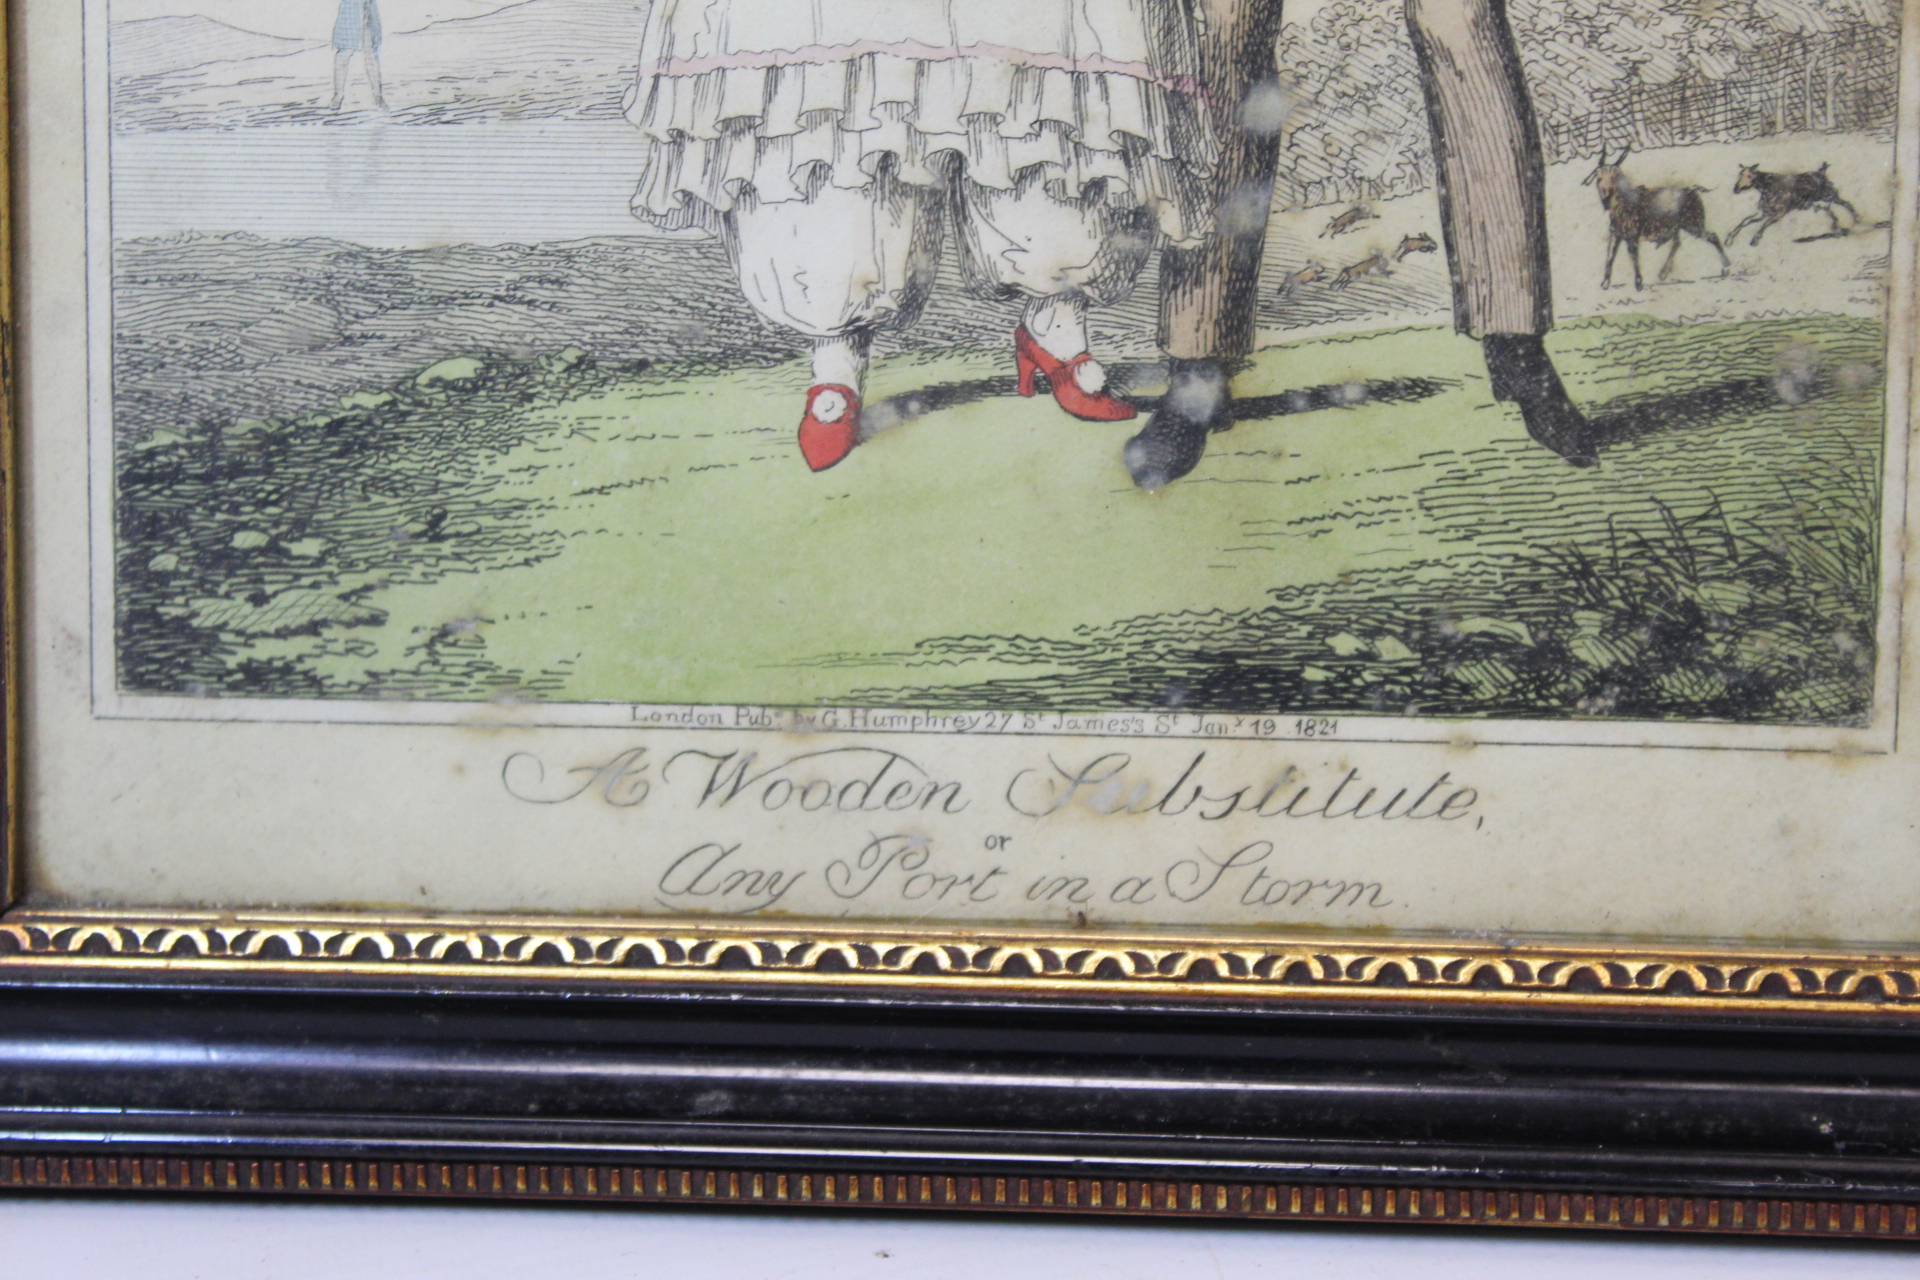 Two early 19th century hand coloured engravings - "A Pas de Deux or Love at First Sight" (Bartolomea - Image 6 of 7